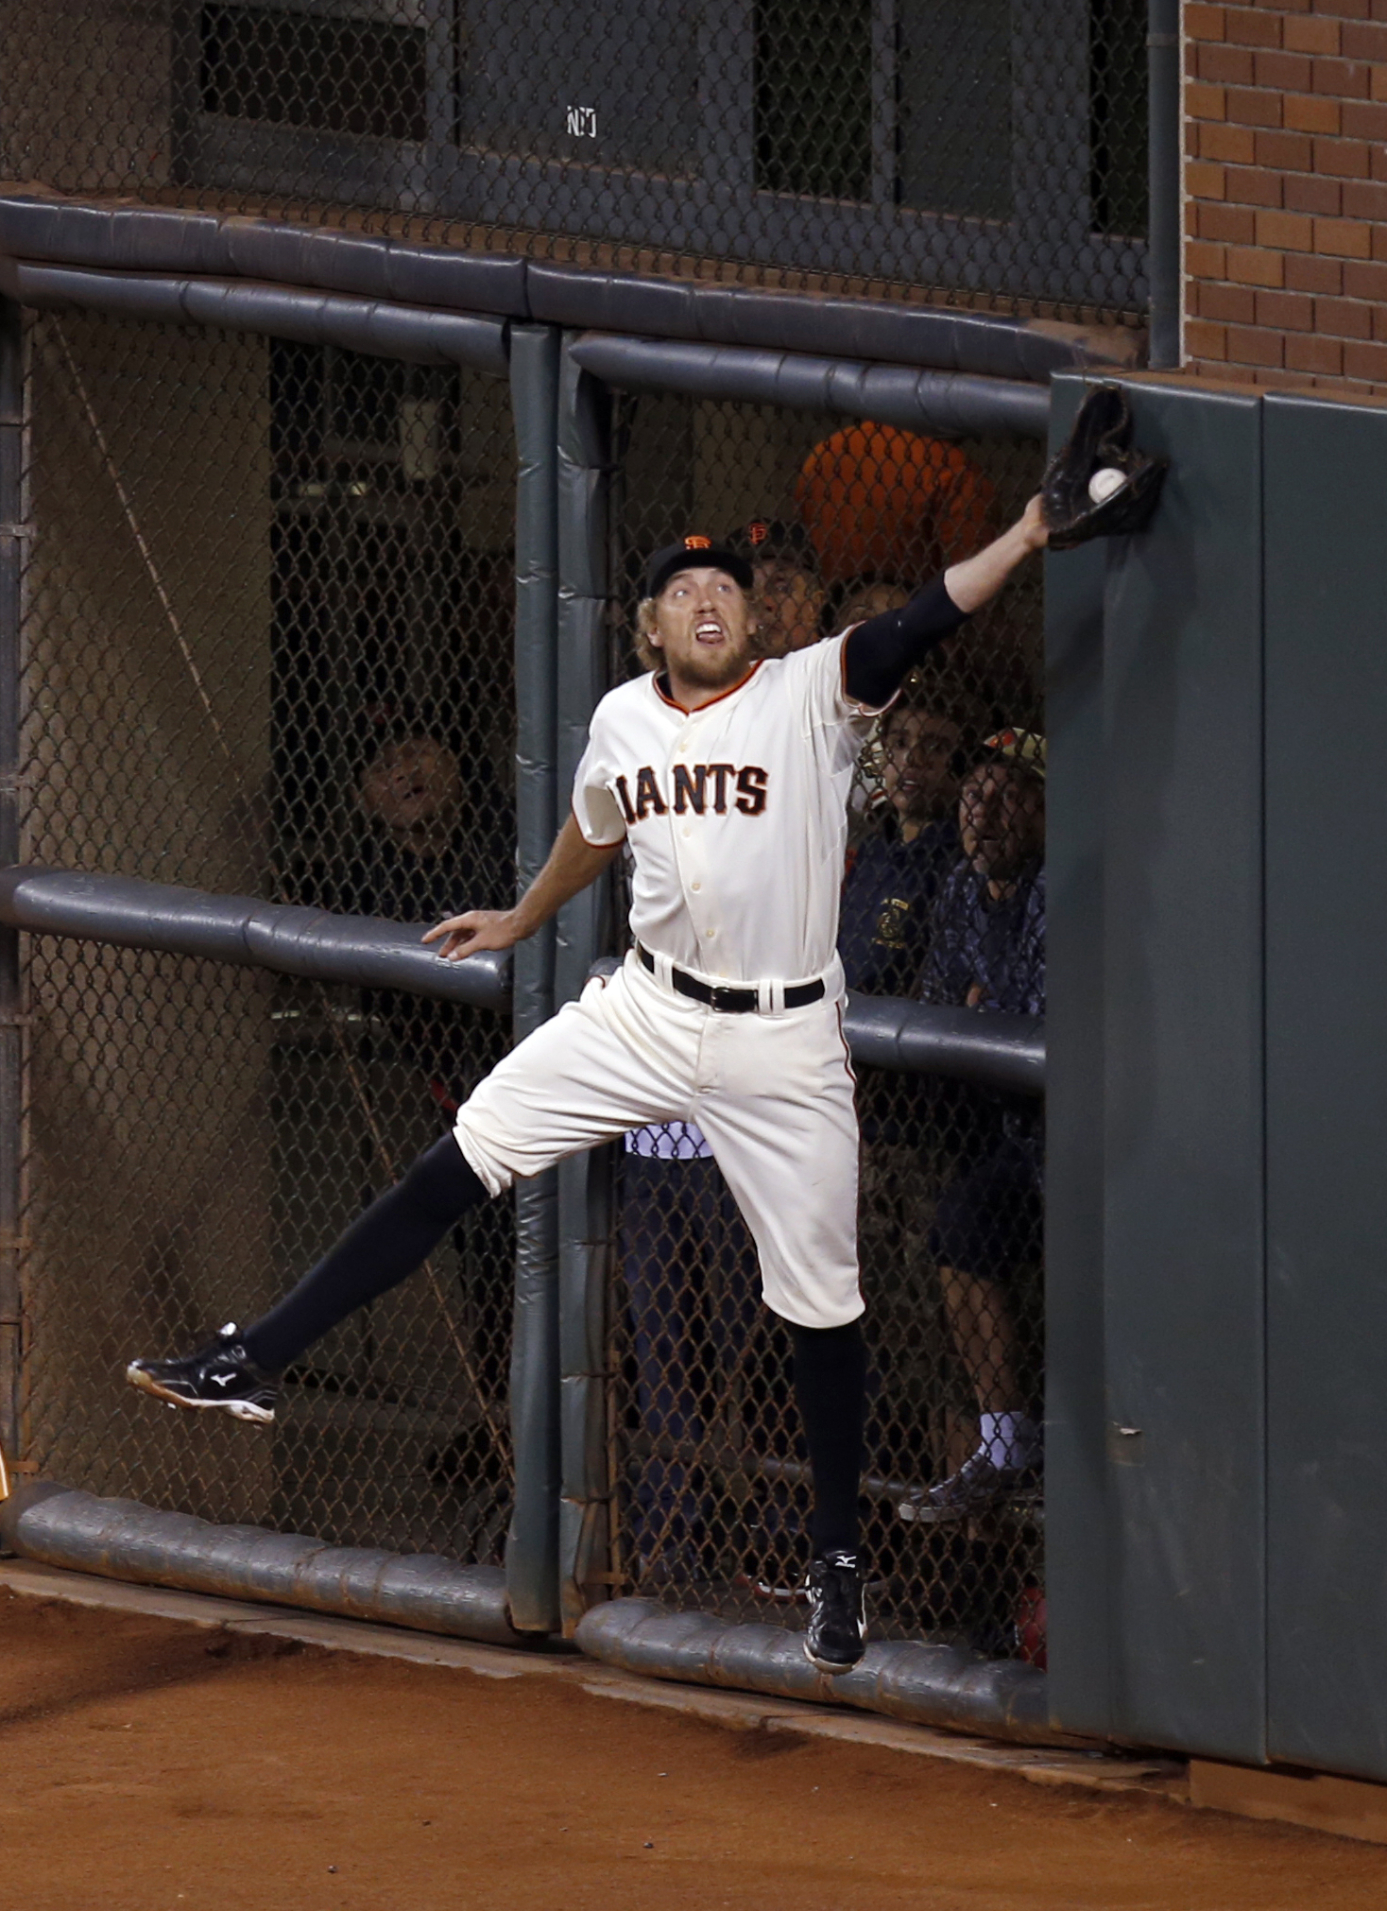 Pence at the fence: Outfielder’s catch was signature play - SFGate1387 x 1911